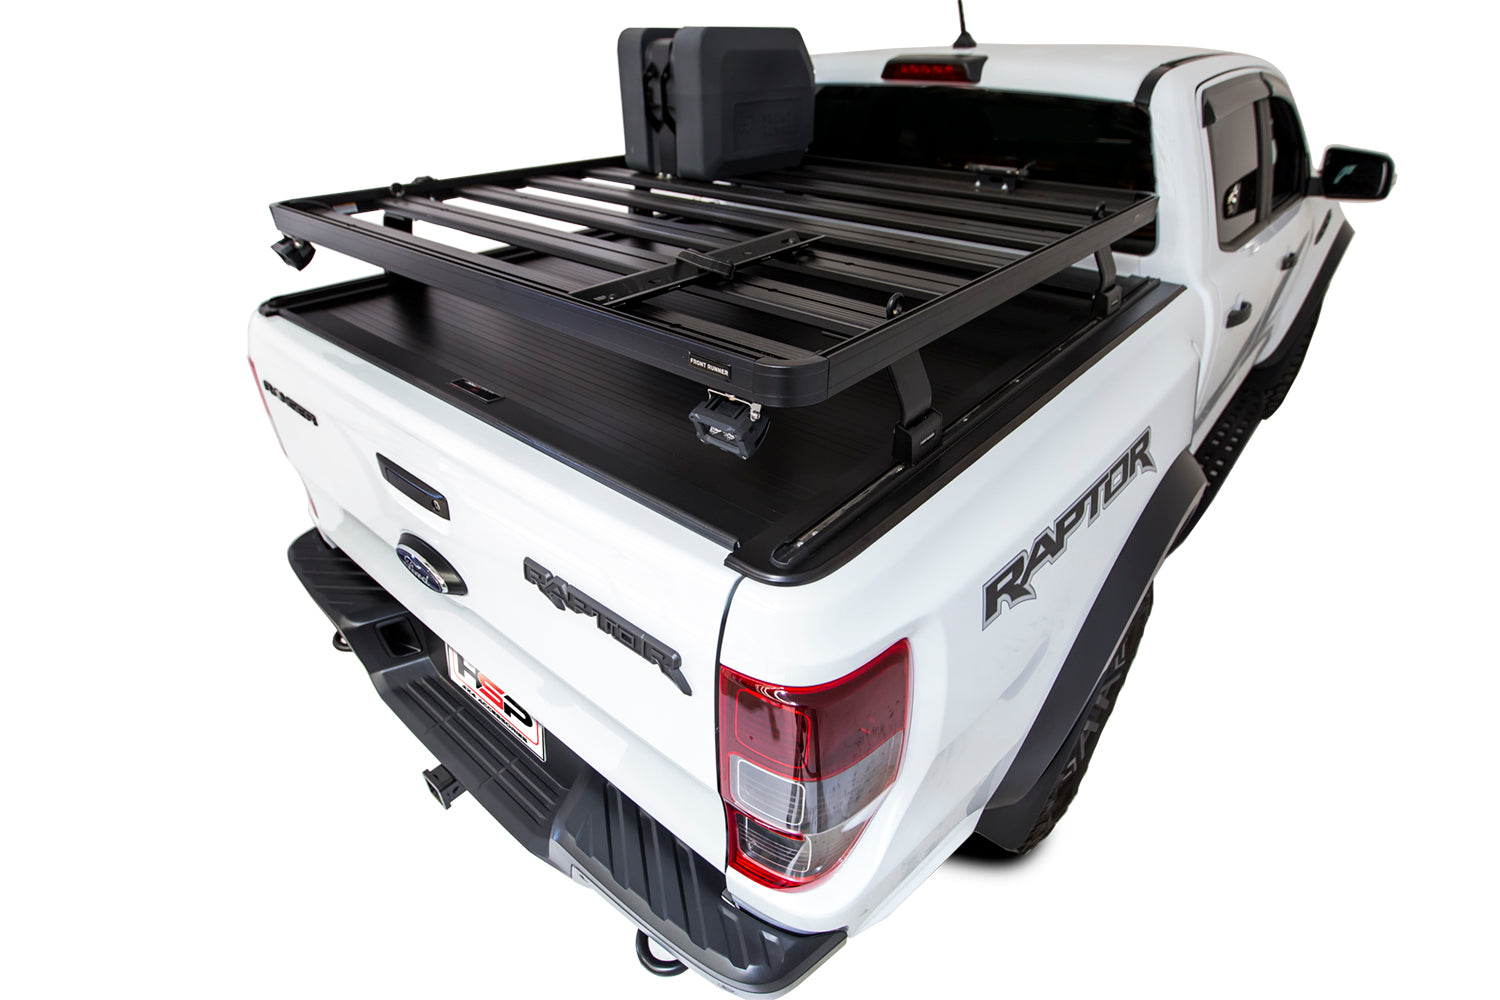 HSP Electric Roll R Cover Slimline II Load Bed Rack Kit / 1425(W) X 1358(L) - by Front Runner | Front Runner